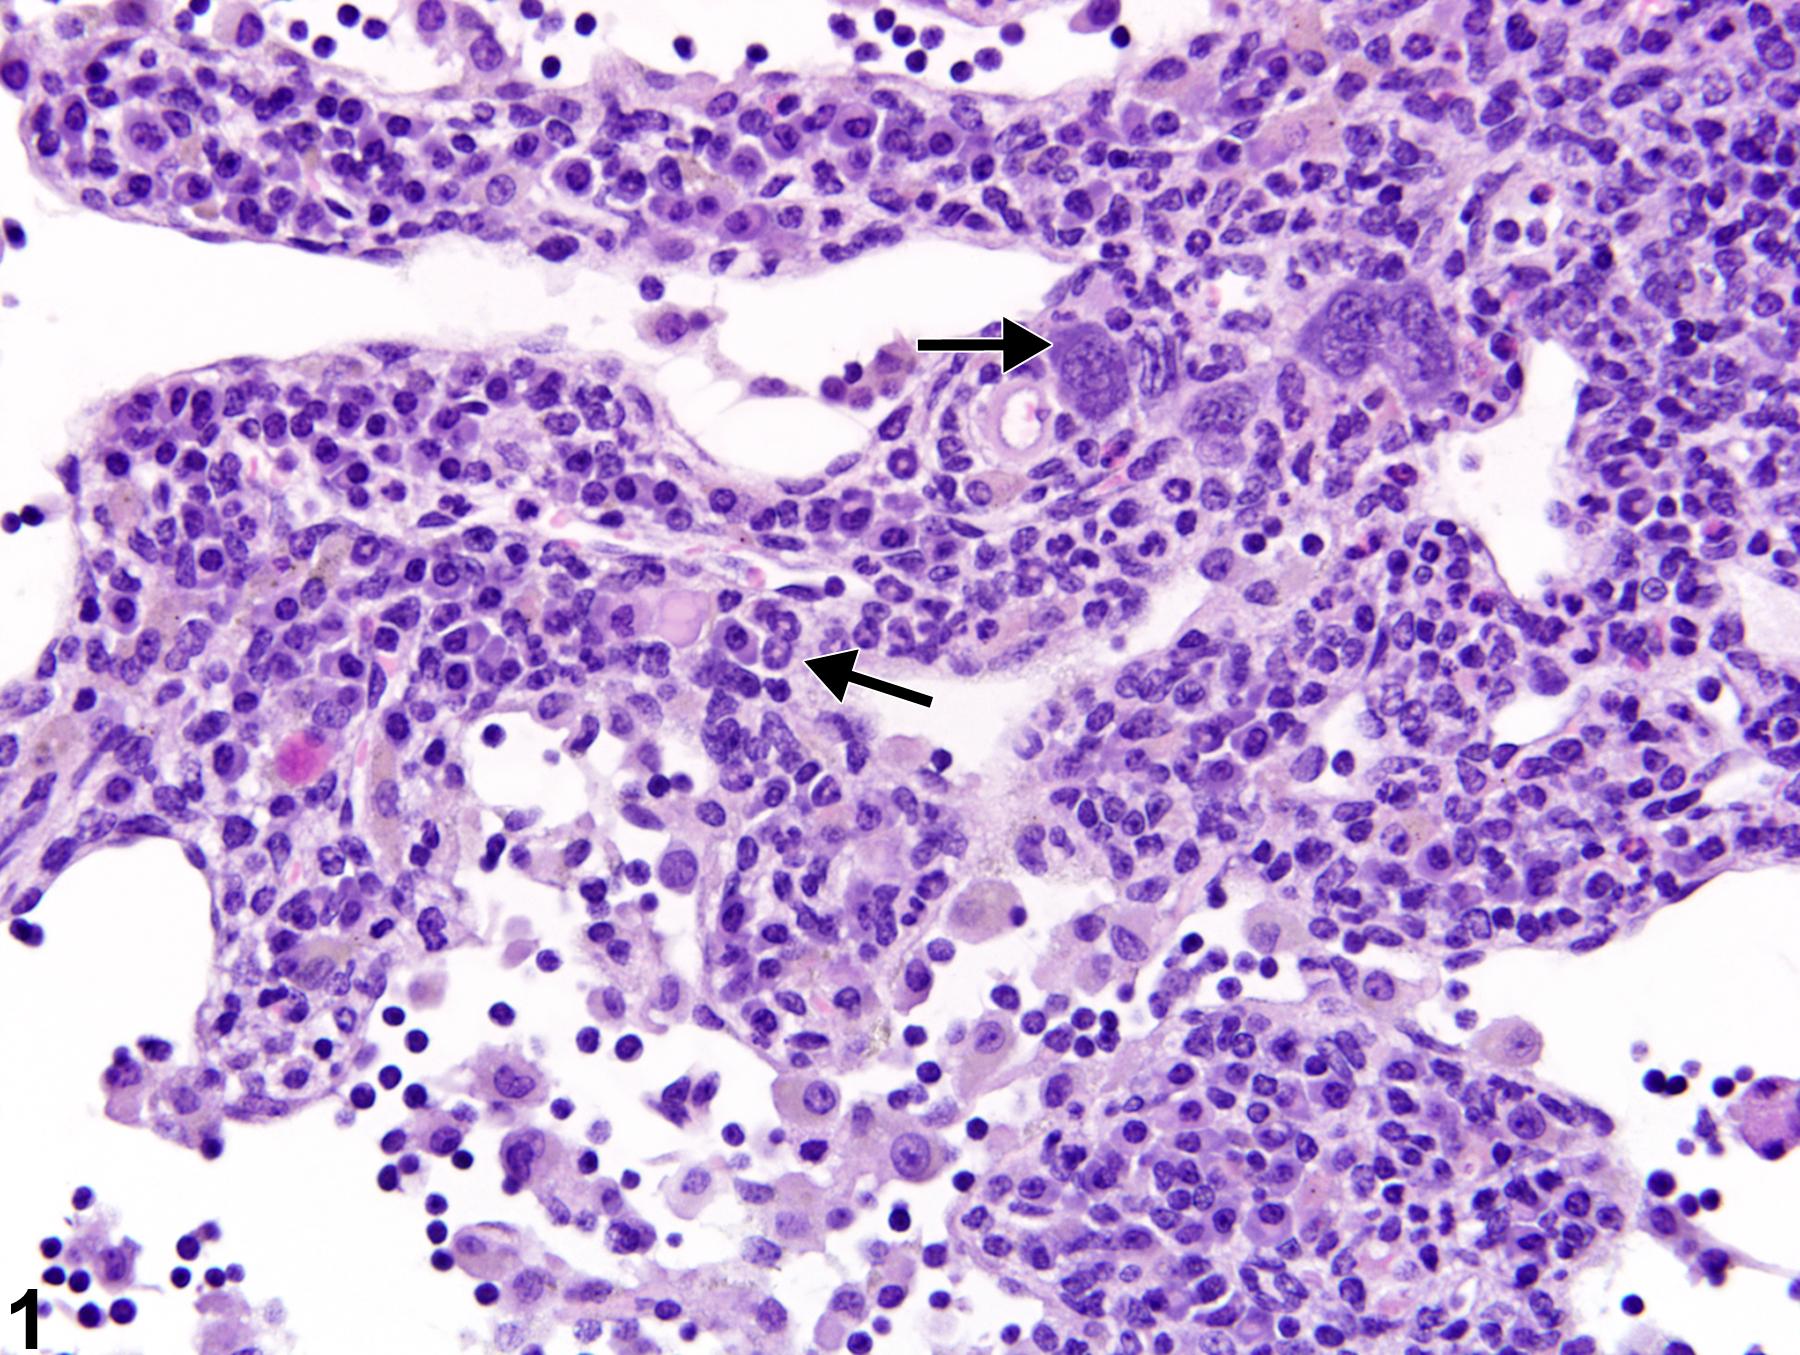 Image of extramedullary hematopoiesis in the lymph node from a female B6C3F1/N mouse in a chronic study